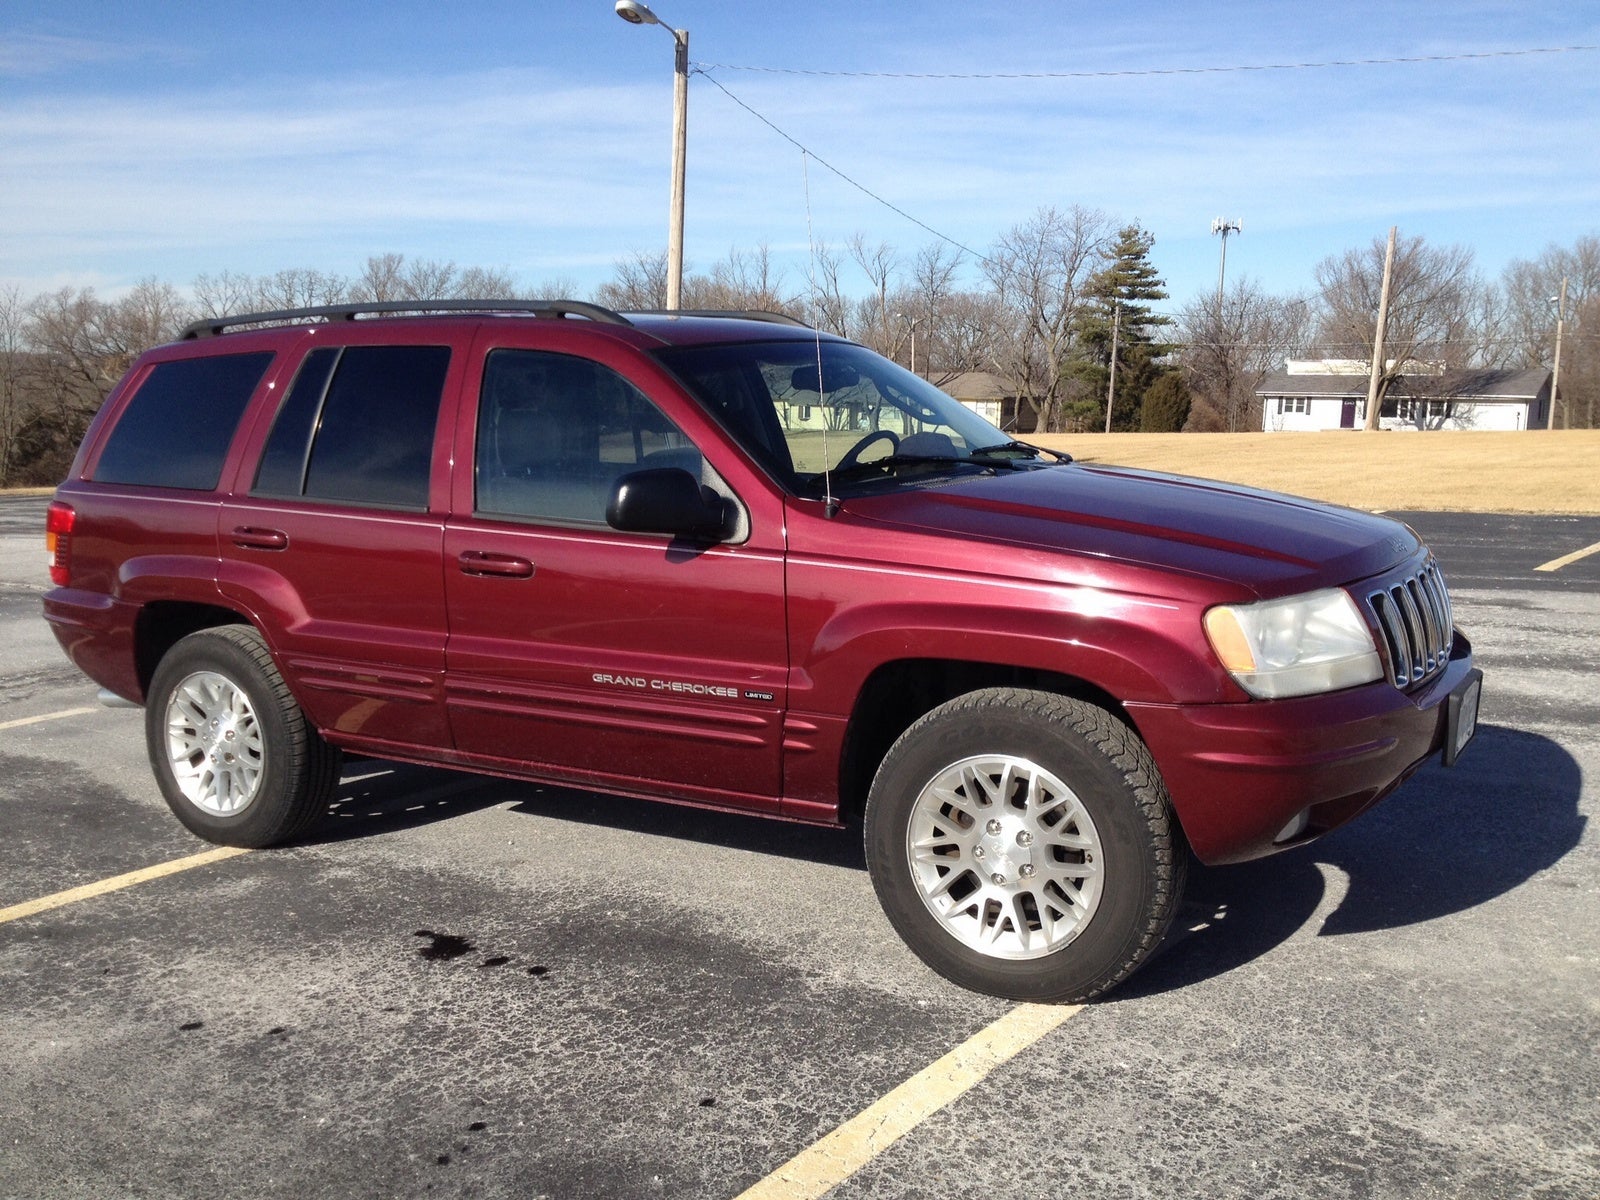 2002 Jeep grand cherokee limited rims #4